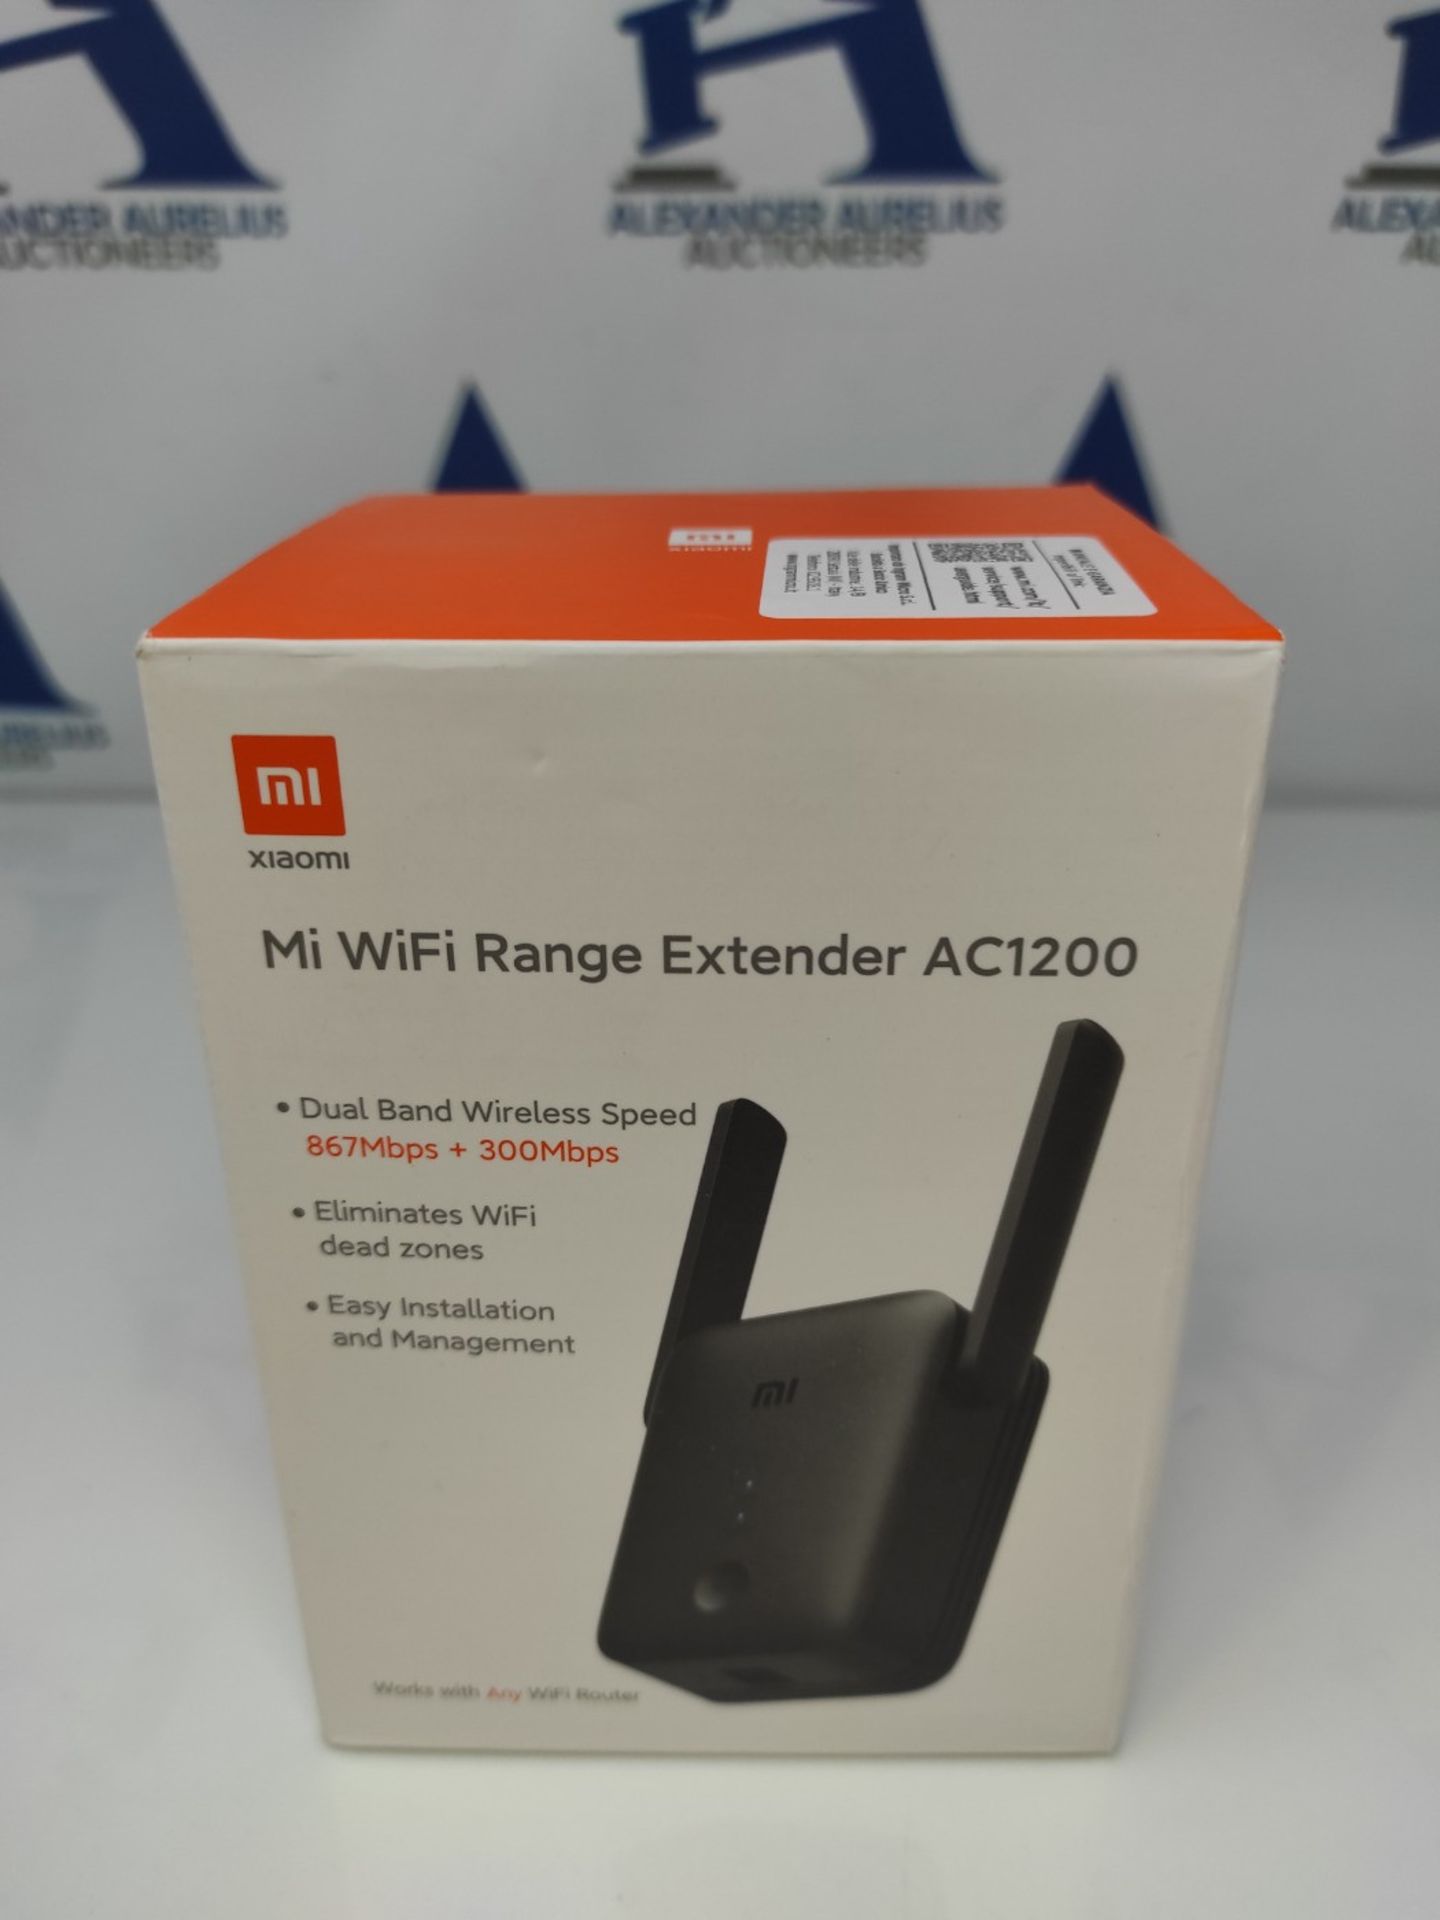 Xiaomi Mi Wi-Fi Range Extender Ac 1200, Wireless Dual Band 867Mbps+300Mbps, 2.4 GHz an - Image 5 of 6